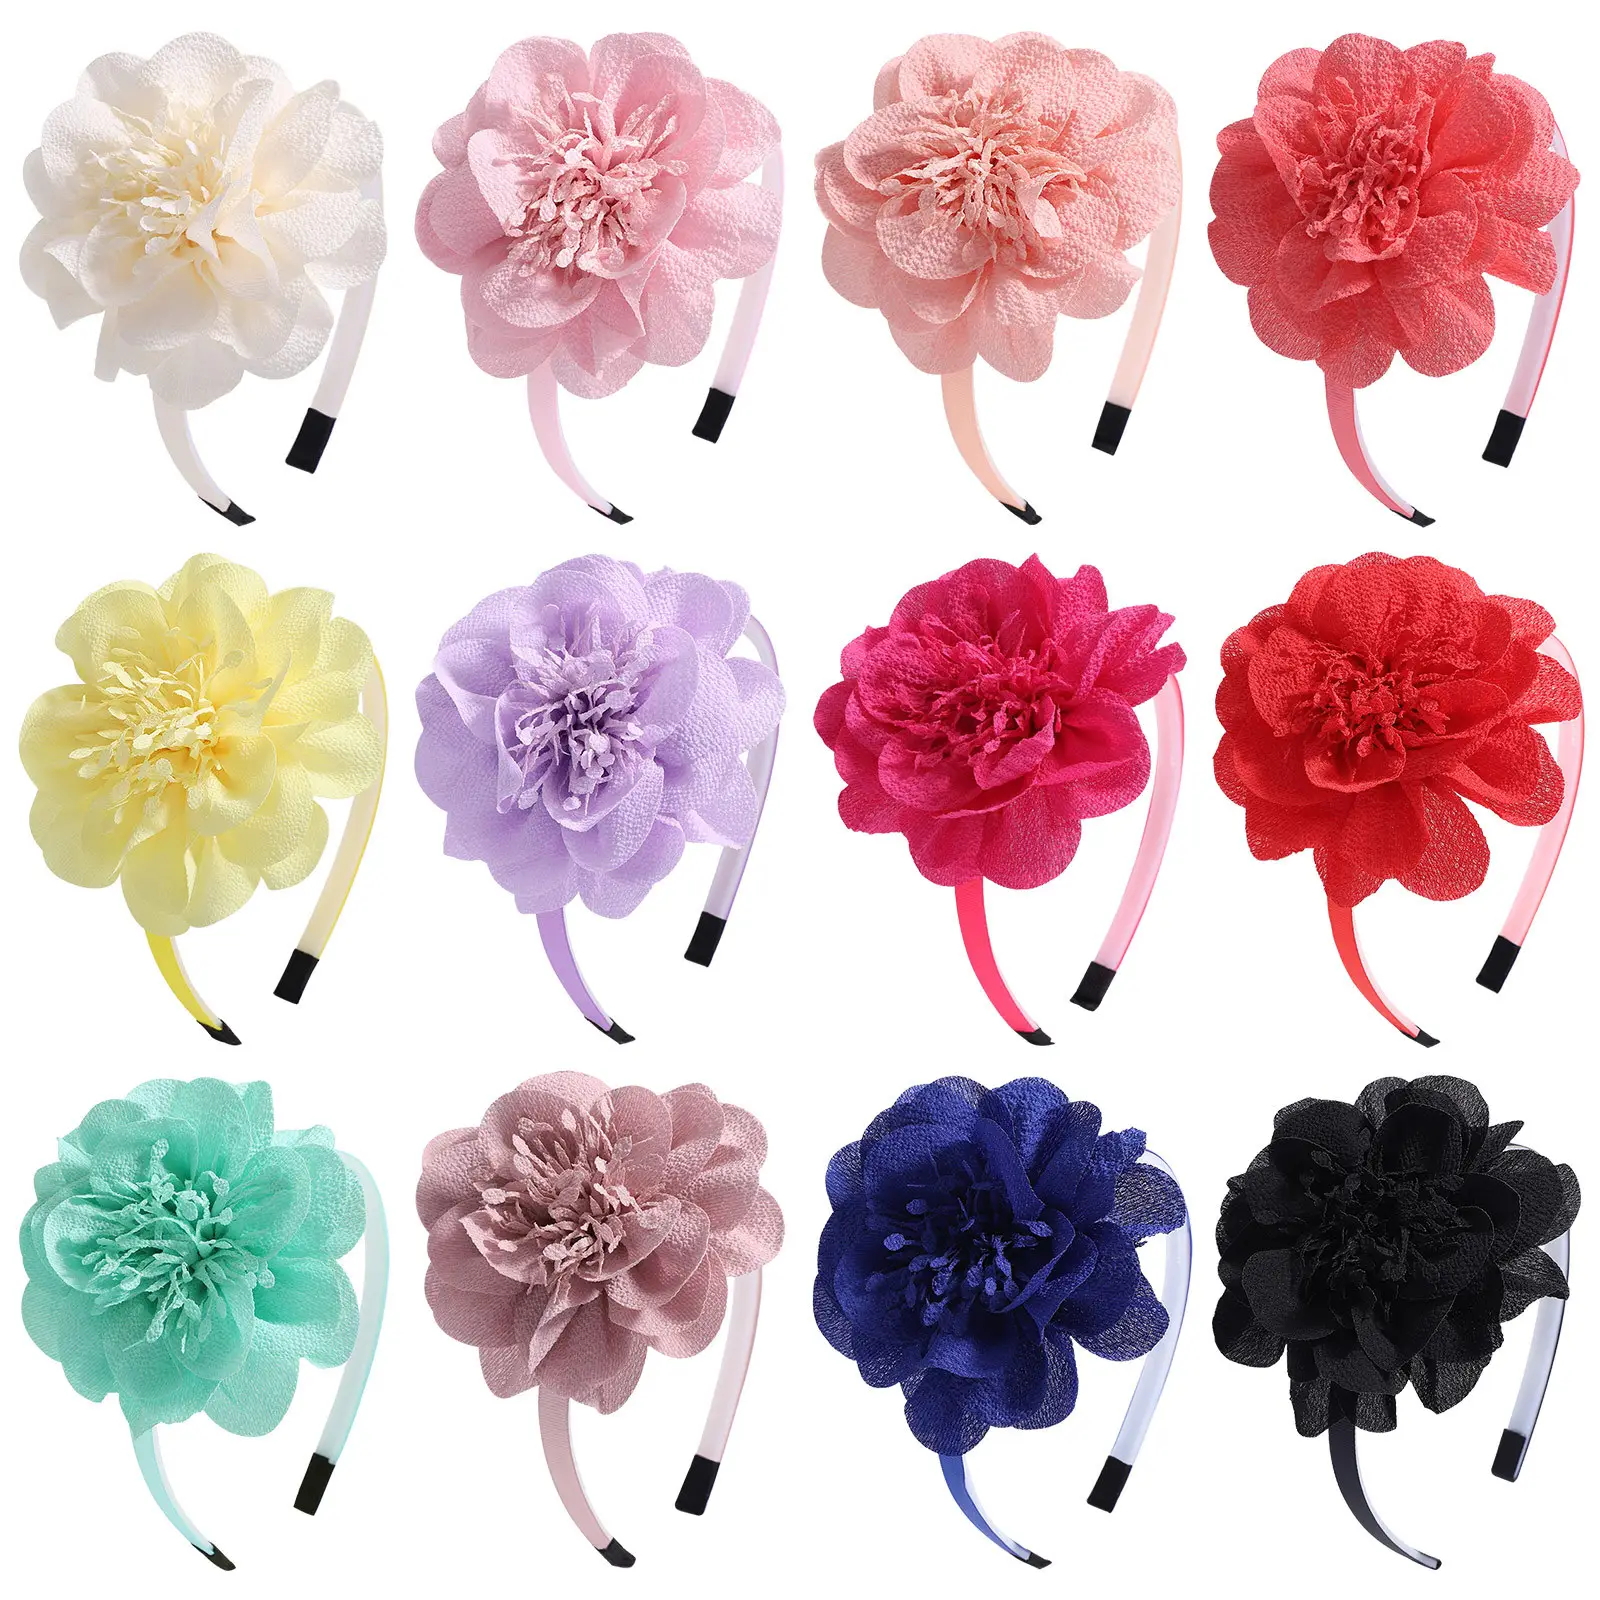 Big Chiffon Flower Crown Headbands Wedding Festival Party Hairbands Tiara Hair Accessories for Baby Girls Toddlers Kids Teens